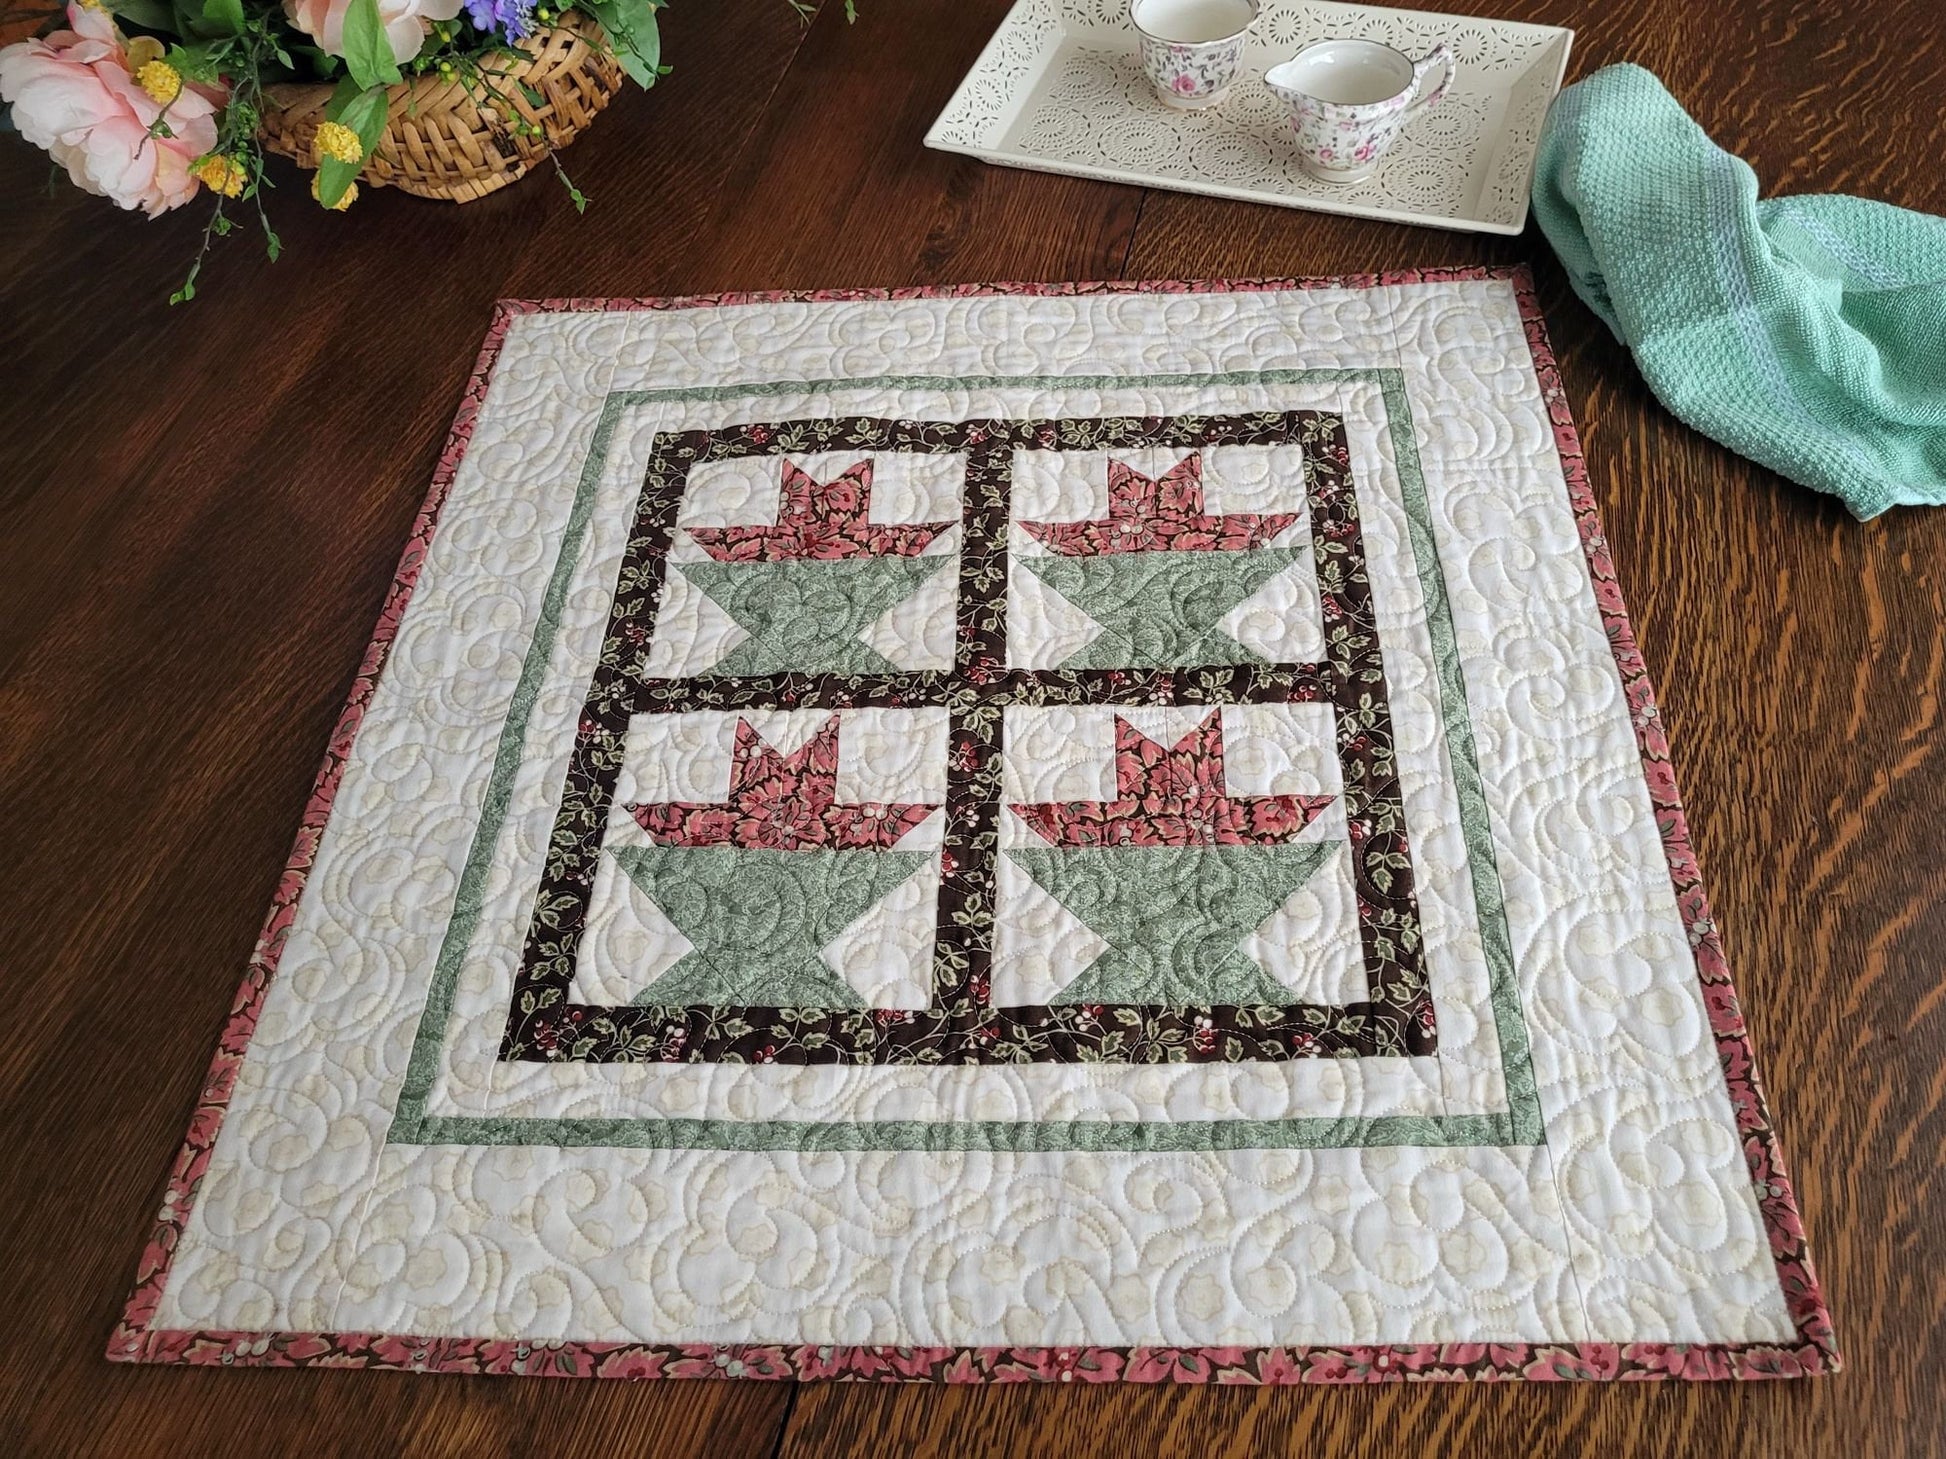 quilted table topper with four patchwork flower baskets